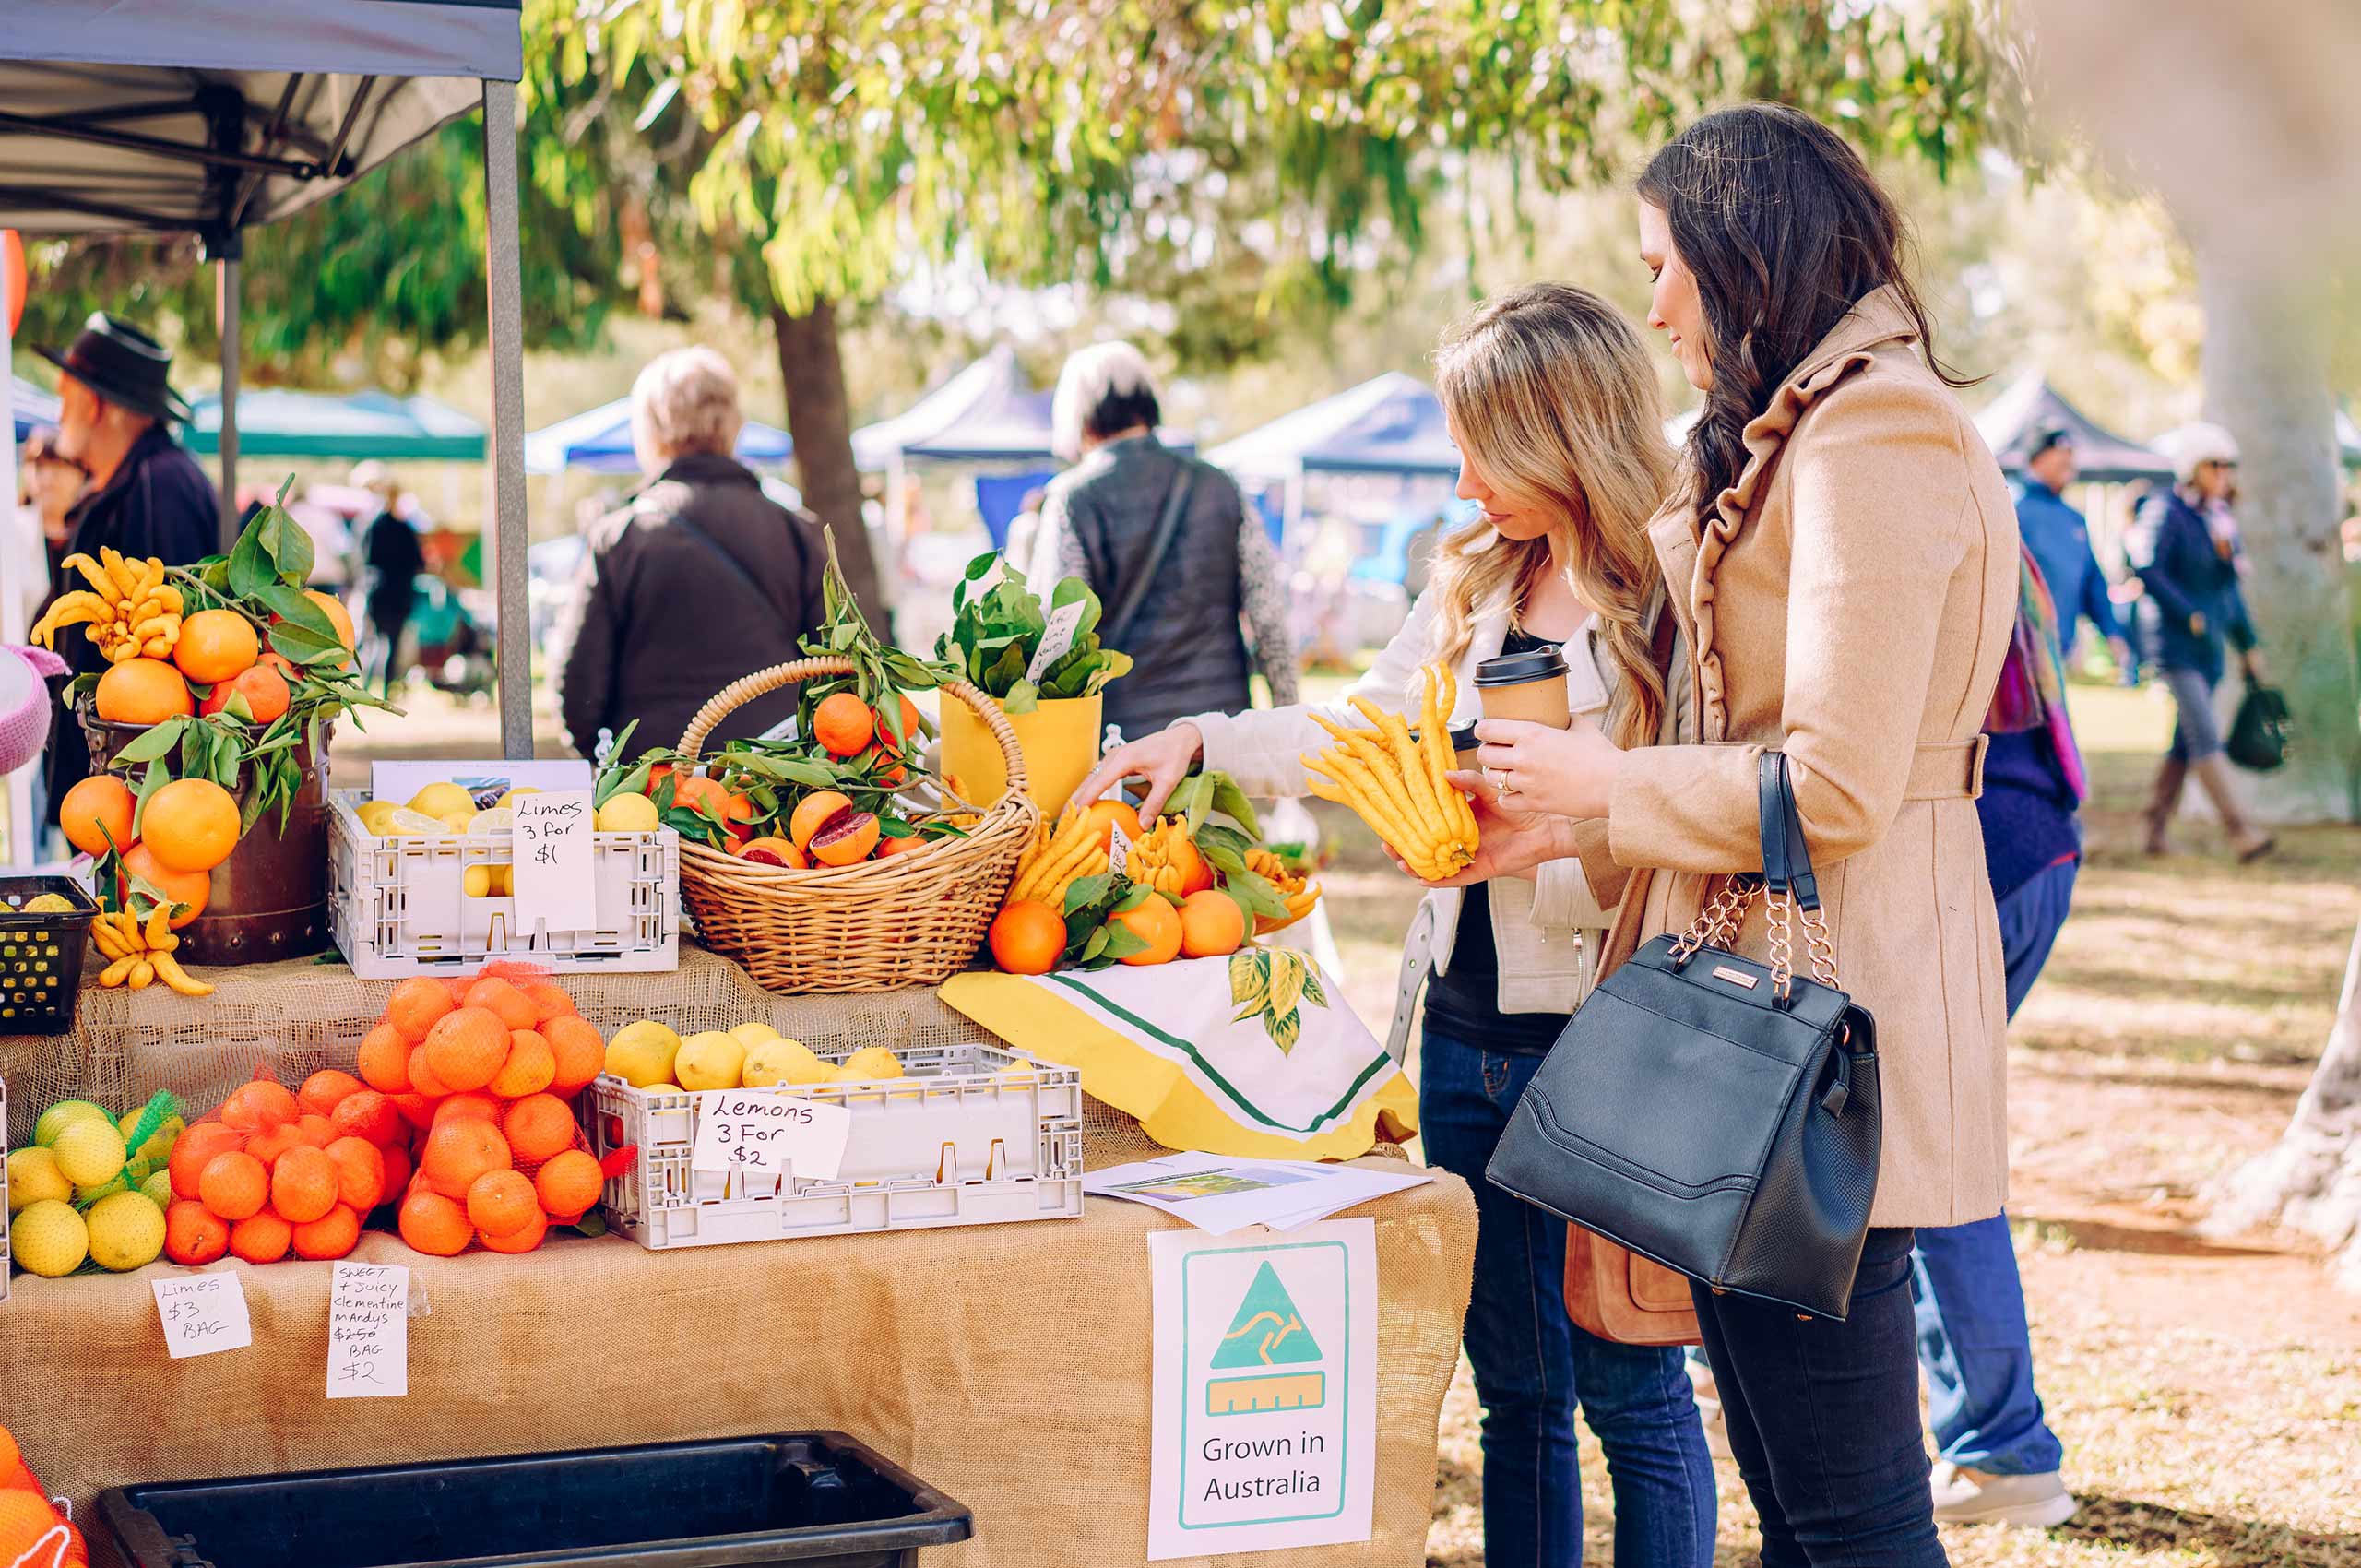 Two women browsing produce and products at a community market.